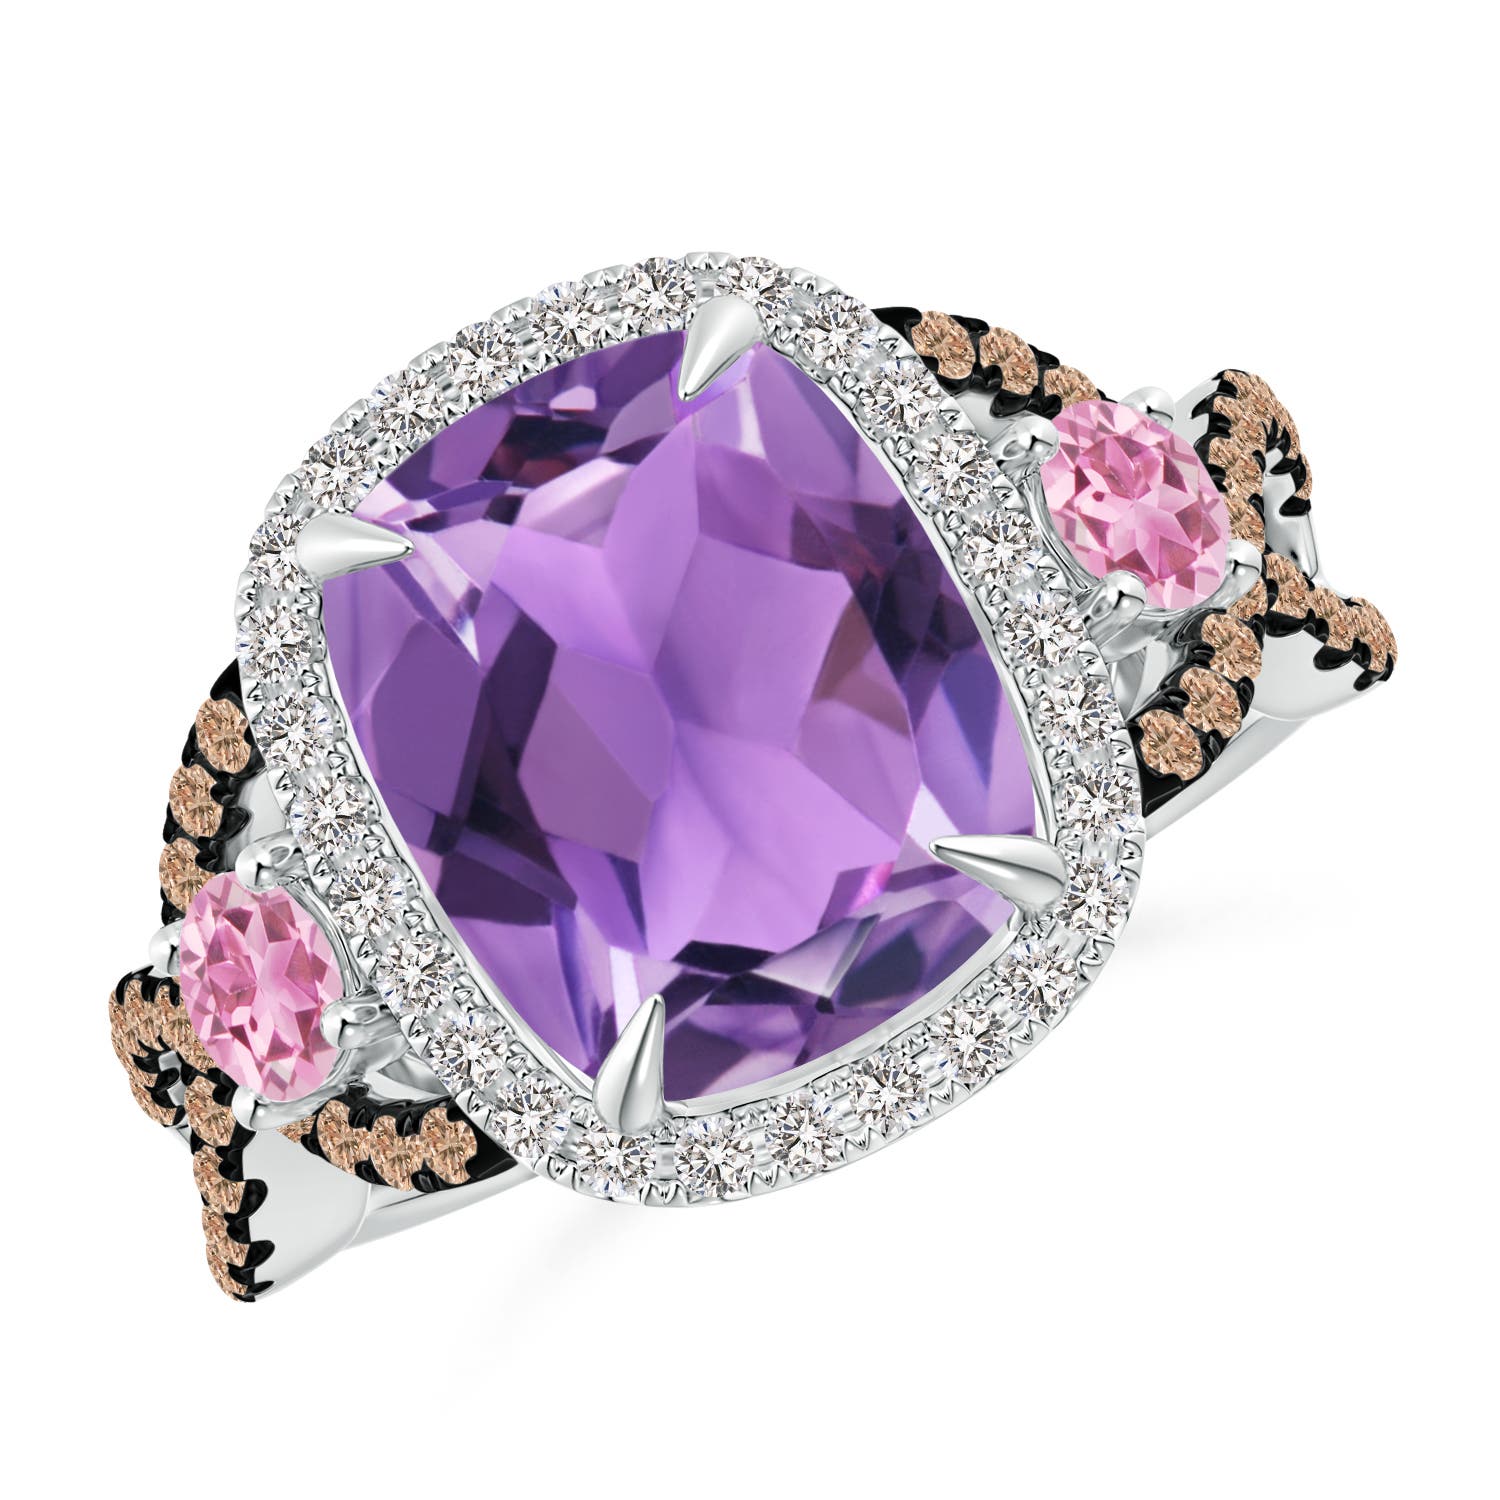 AA - Amethyst / 4.4 CT / 14 KT White Gold